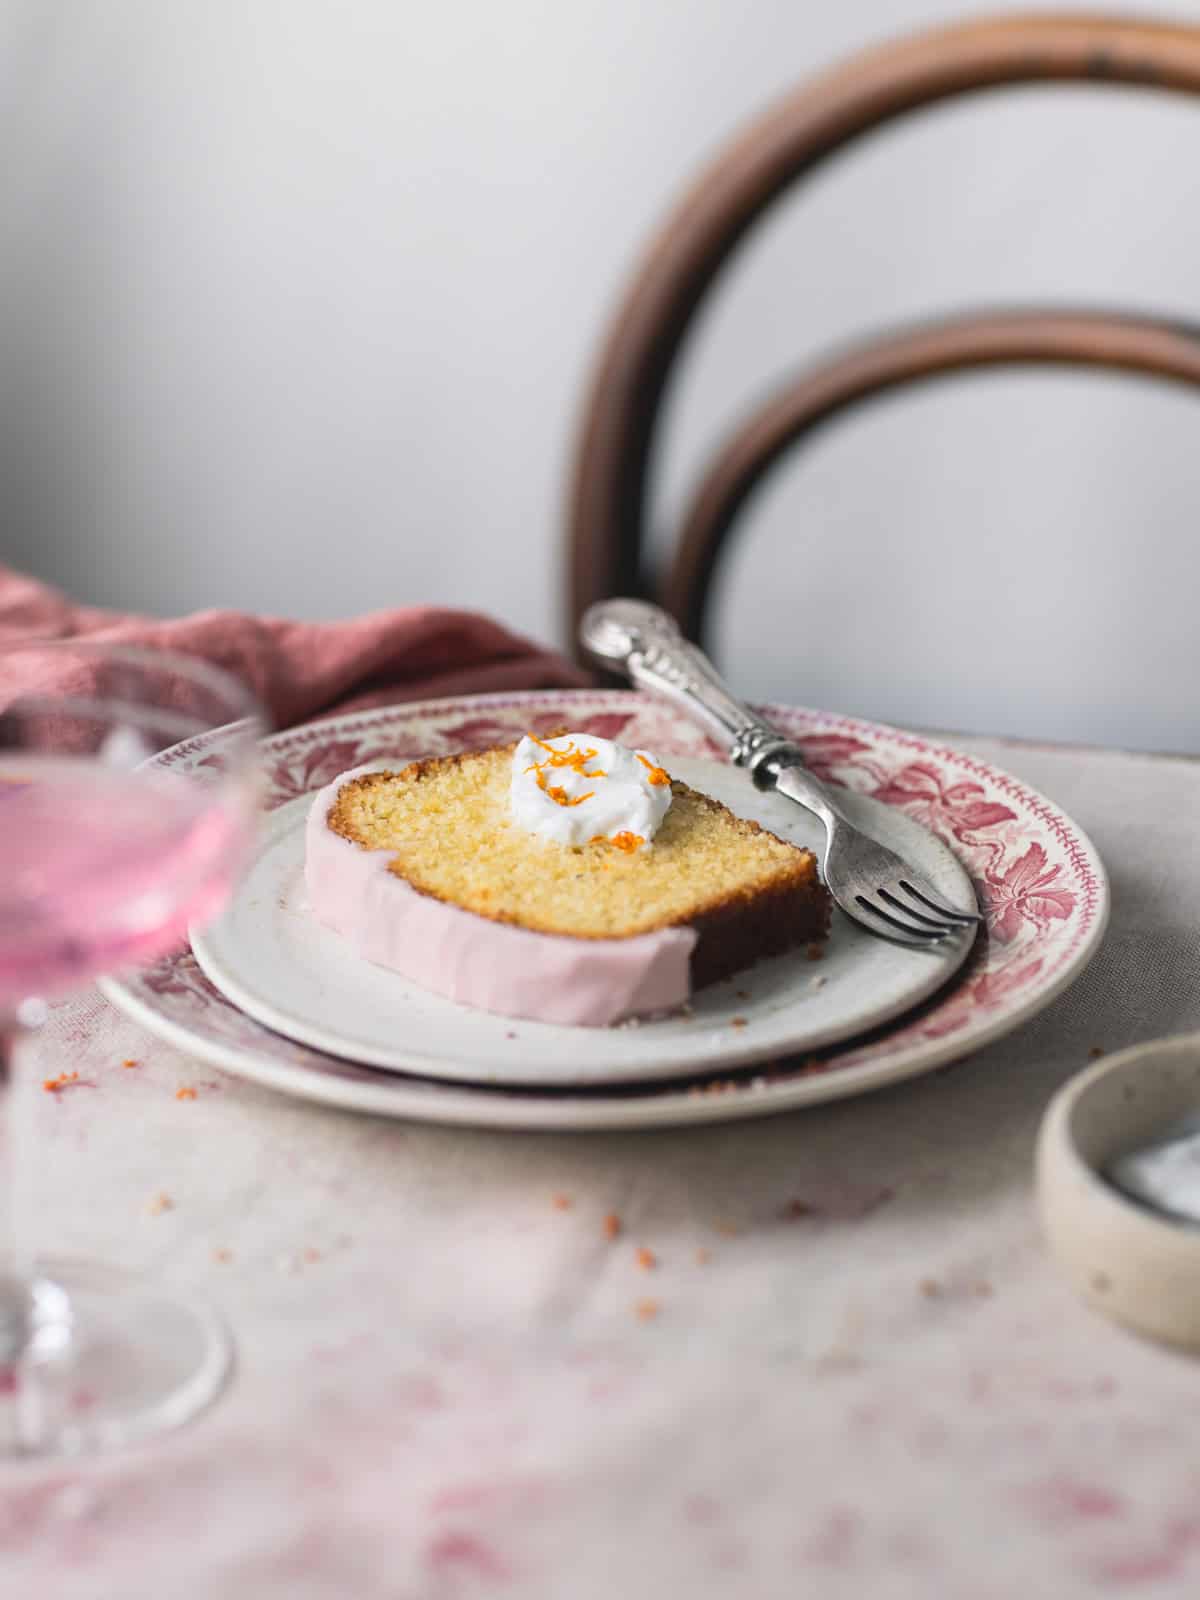 Side photo of a slice of gluten free cake, with on top some whipped cream and few oranges zest, on white plate on a flower background